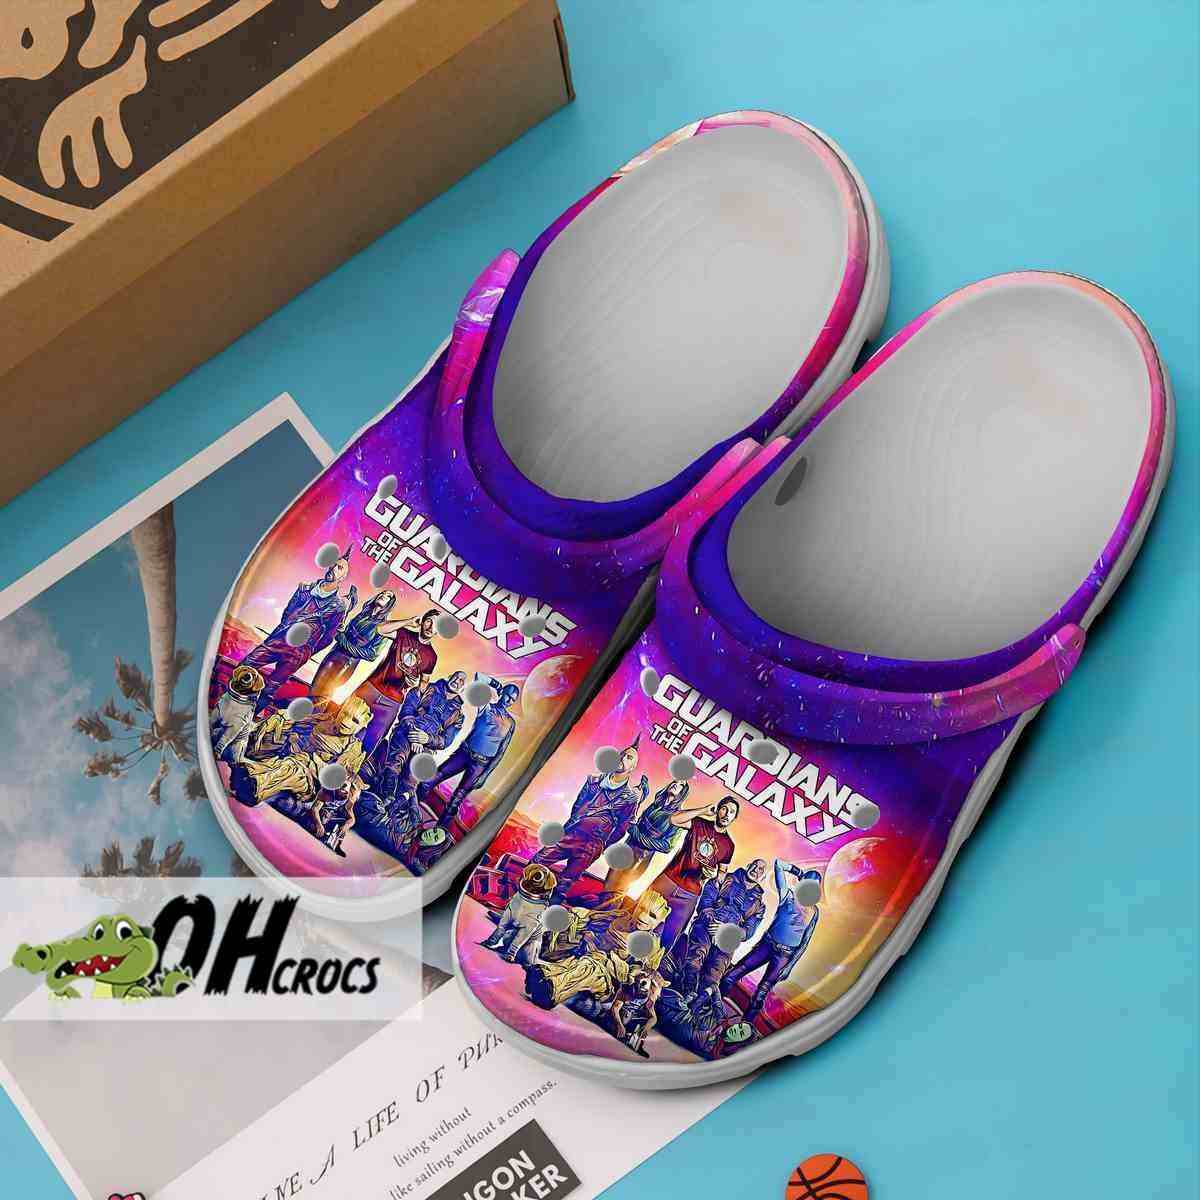 Guardians of the Galaxy Team Crocs Shoes